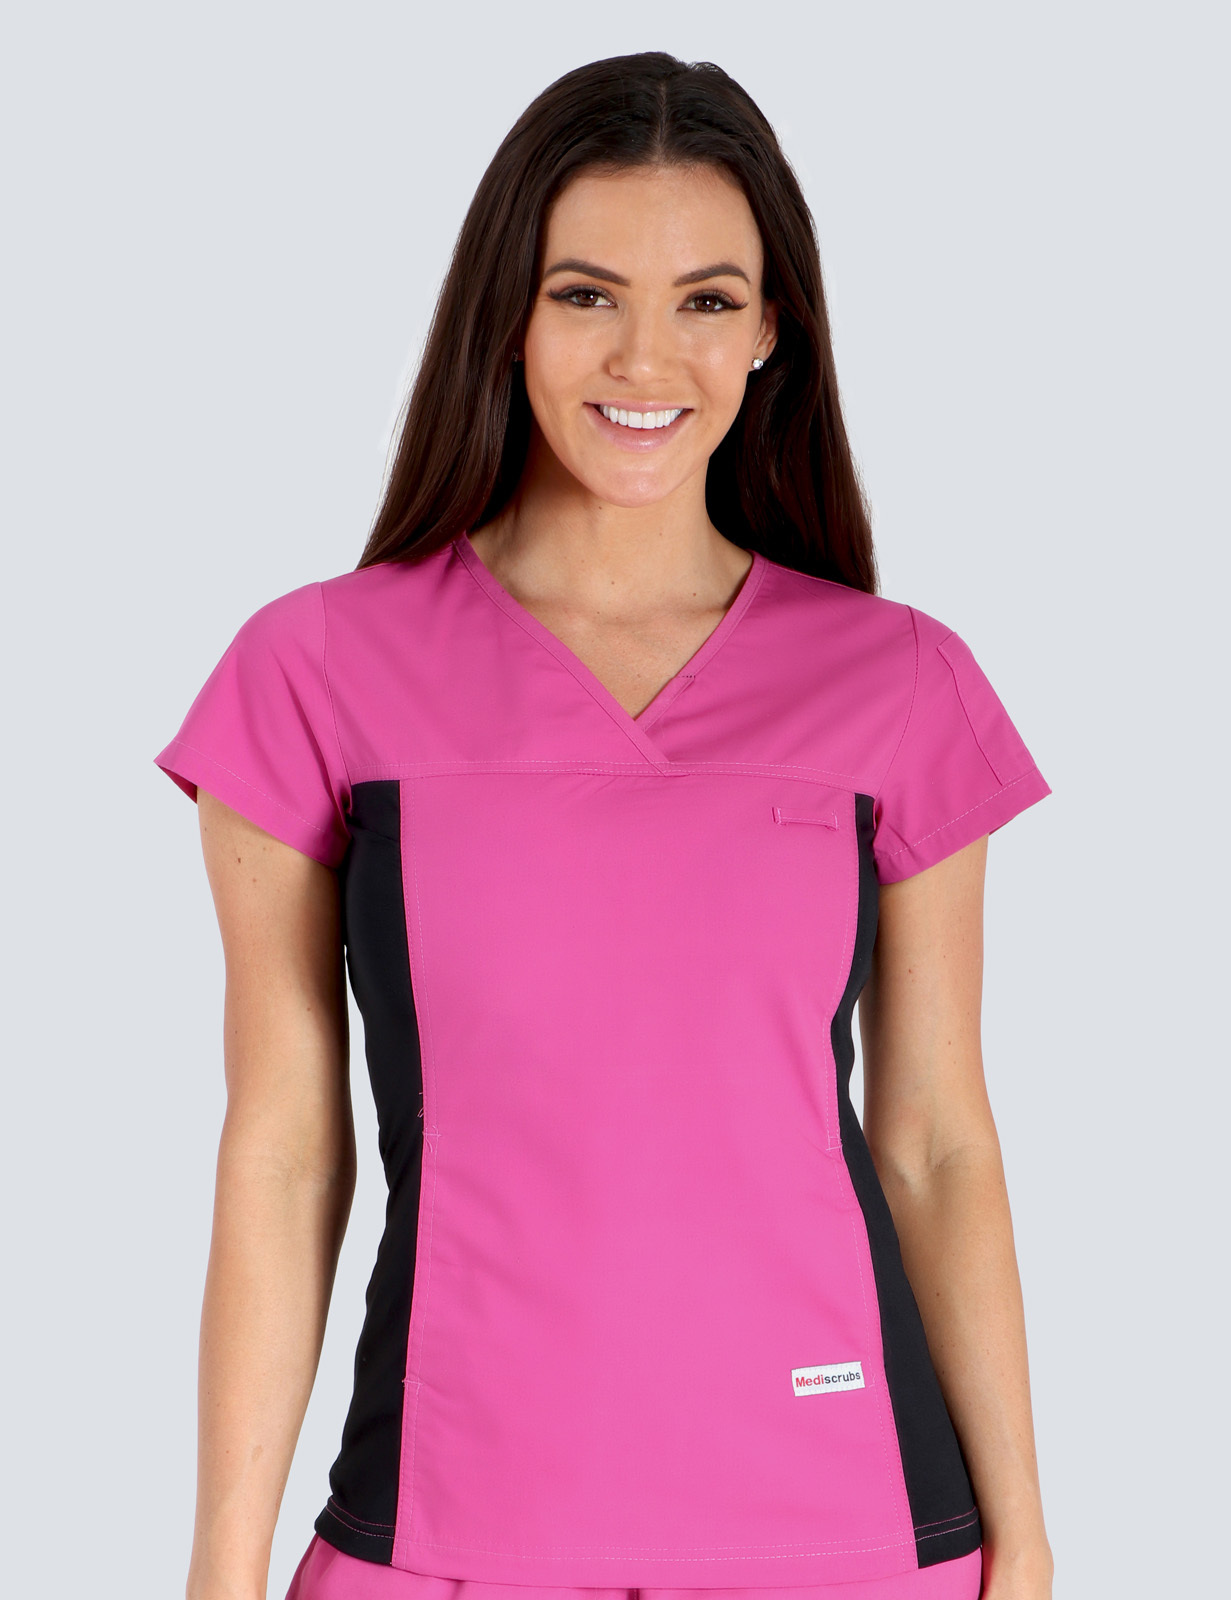 Women's Fit Solid Scrub Top With Spandex Panel - Pink - 4X large